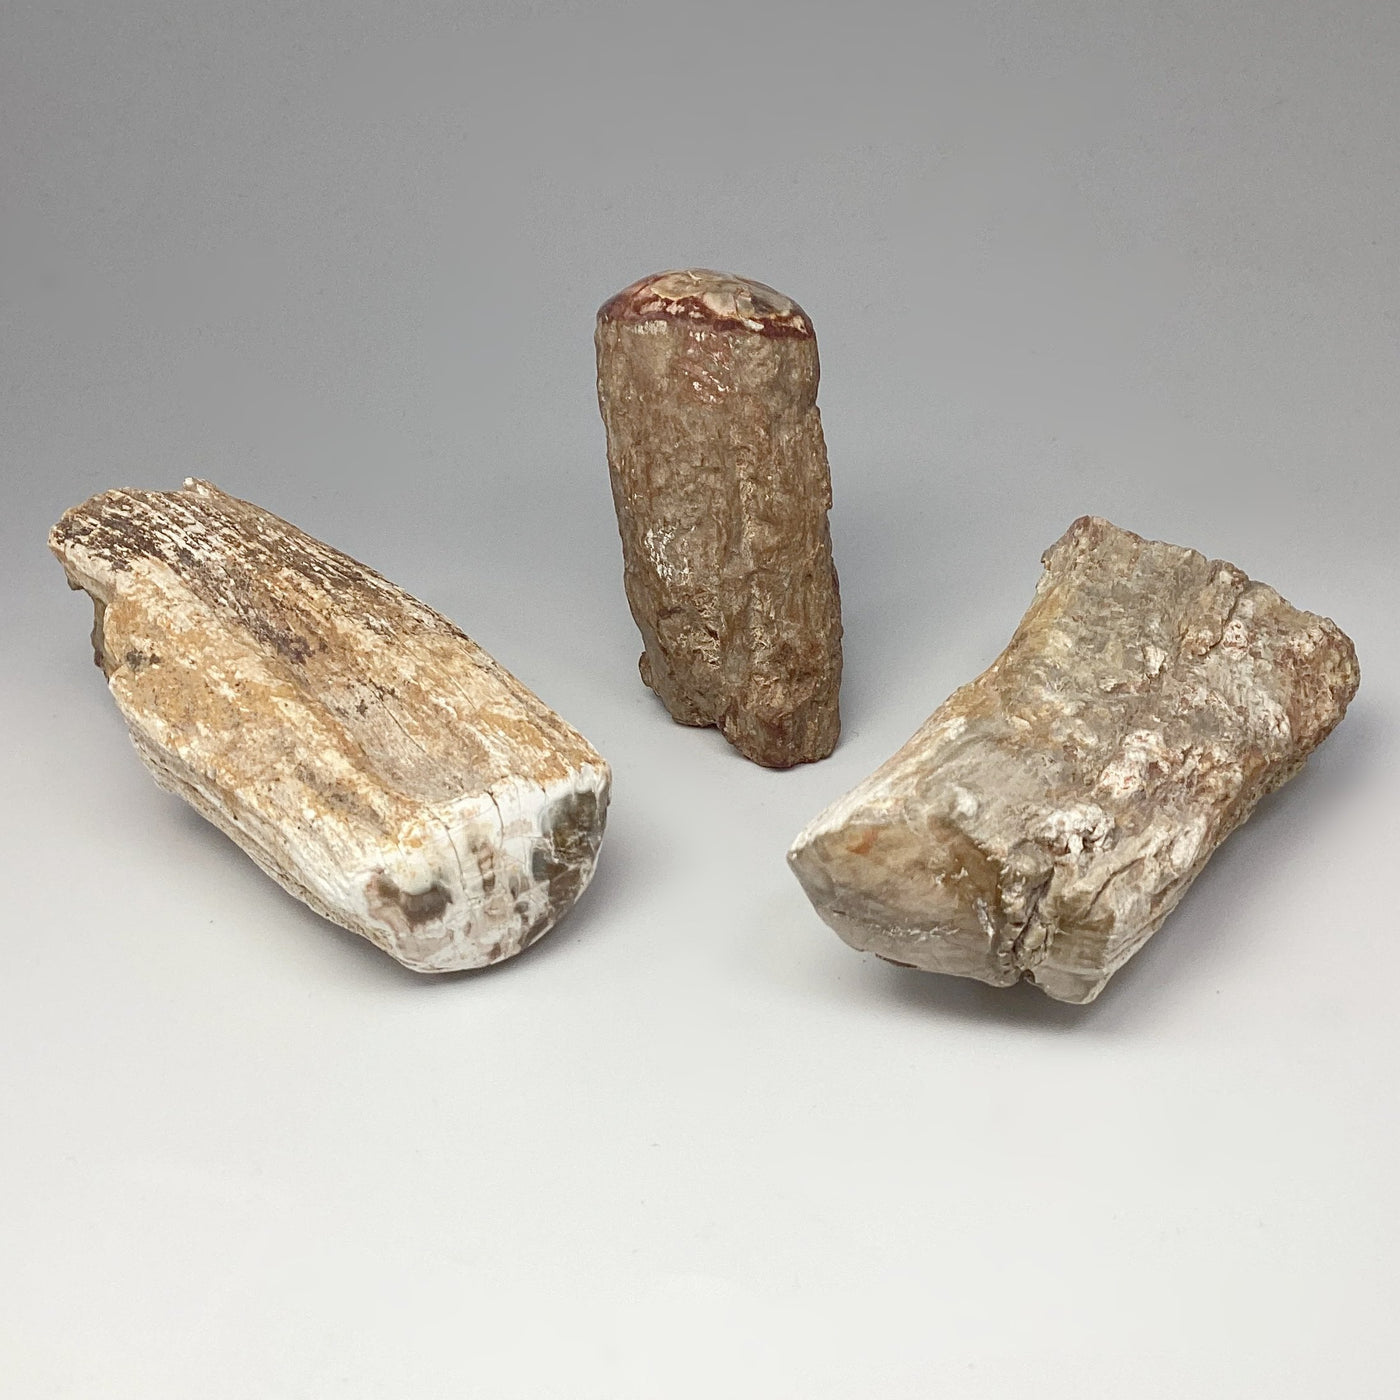 Petrified Wood Branch at $49 Each